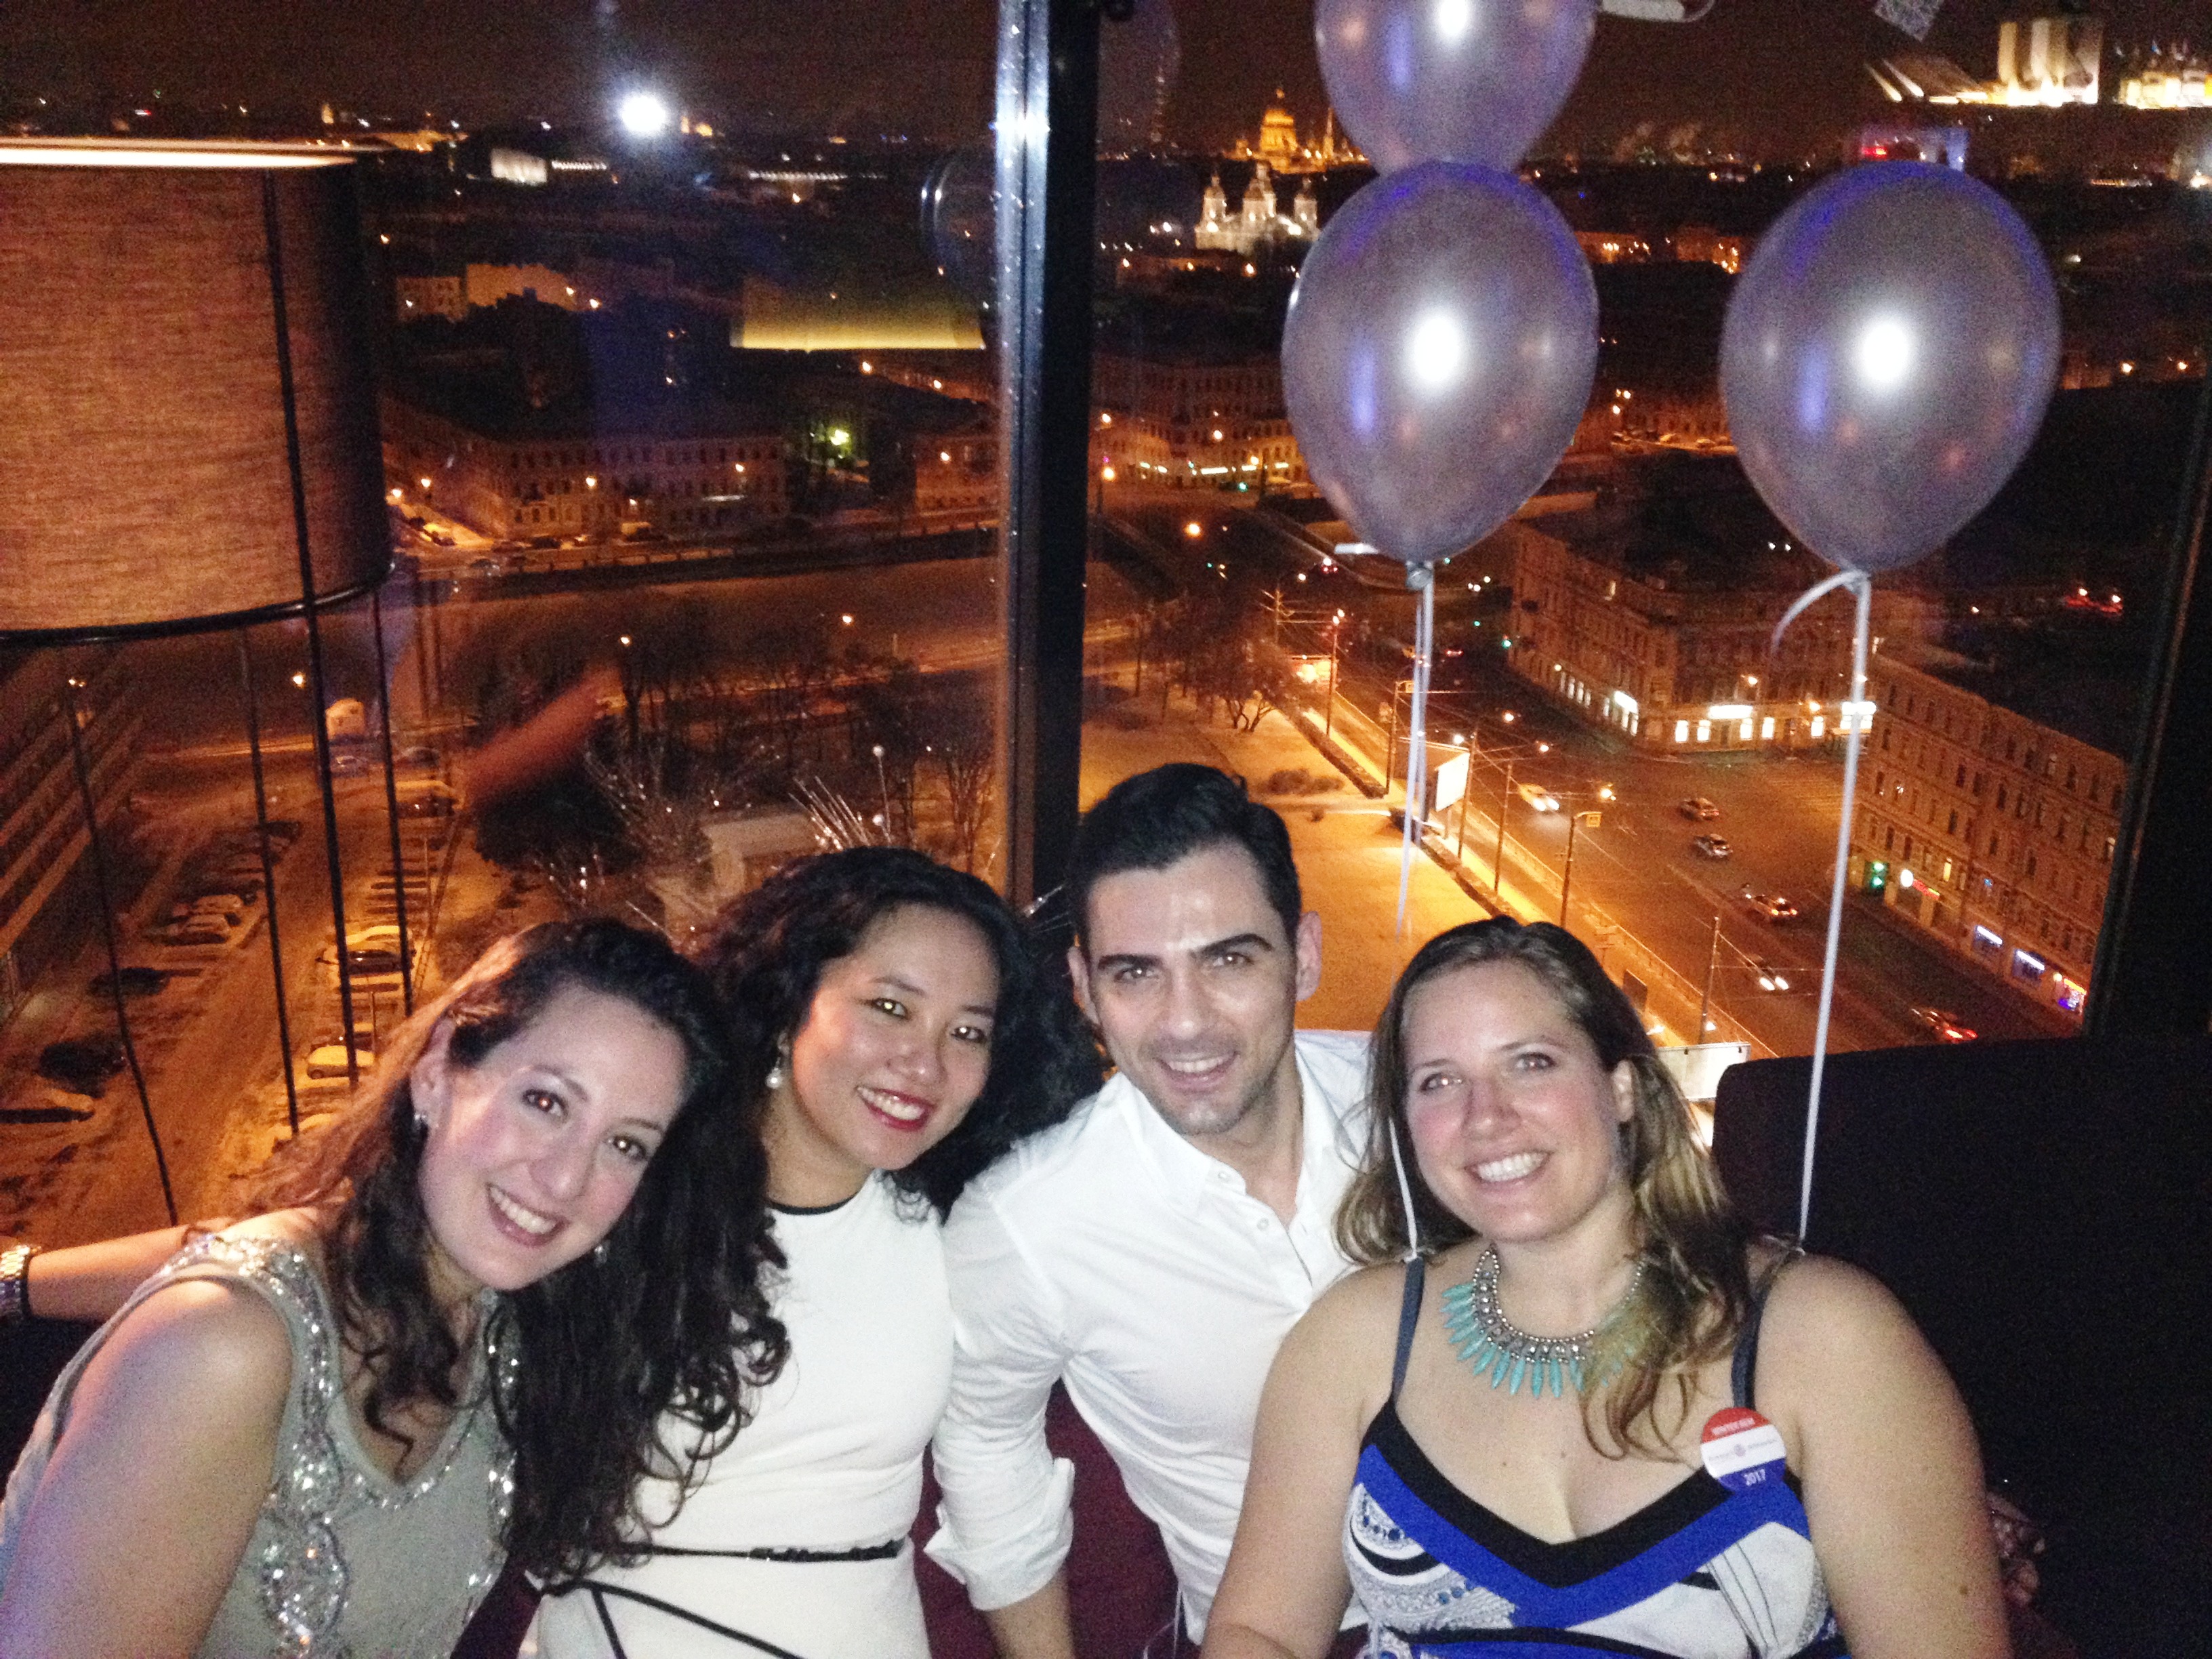 On top of St. Petersburg - At Sky bar with my Swiss gang